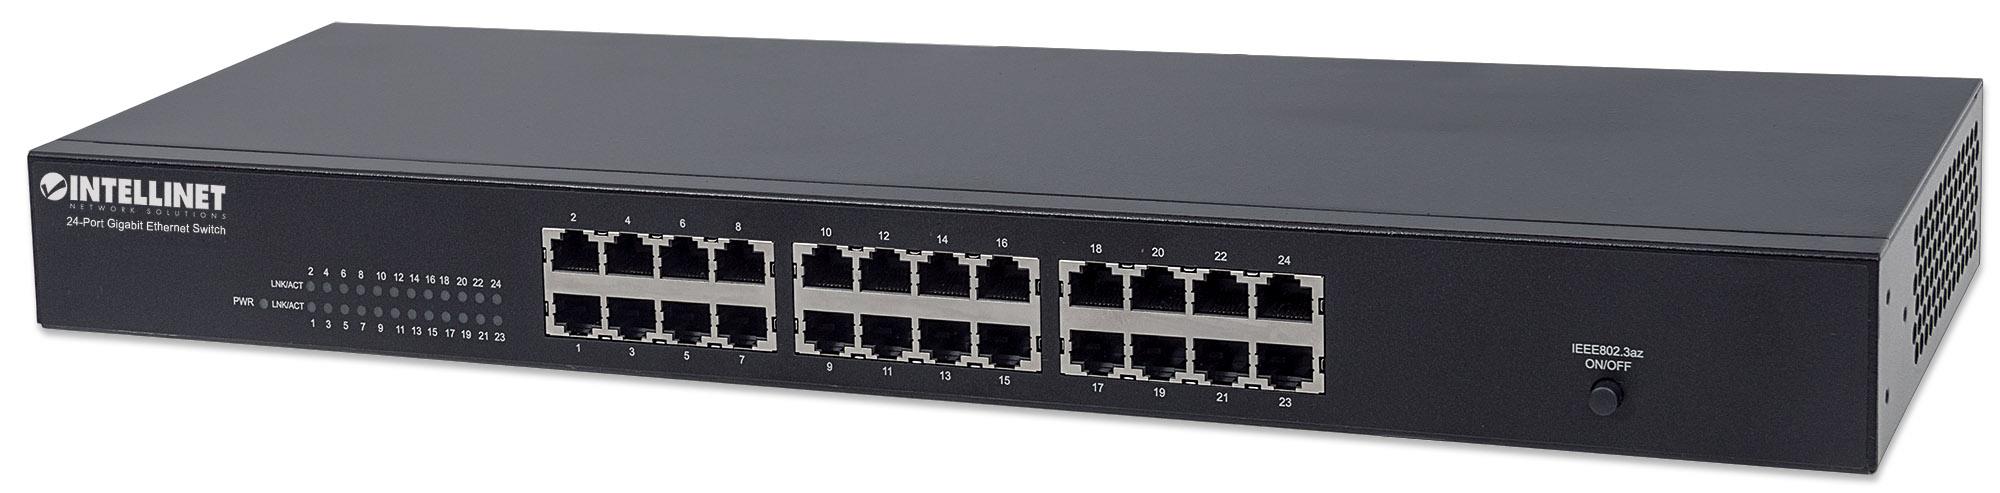 Gigabit Ethernet Switch 24 Porte Rack 19 Switch Switch E Router Networking